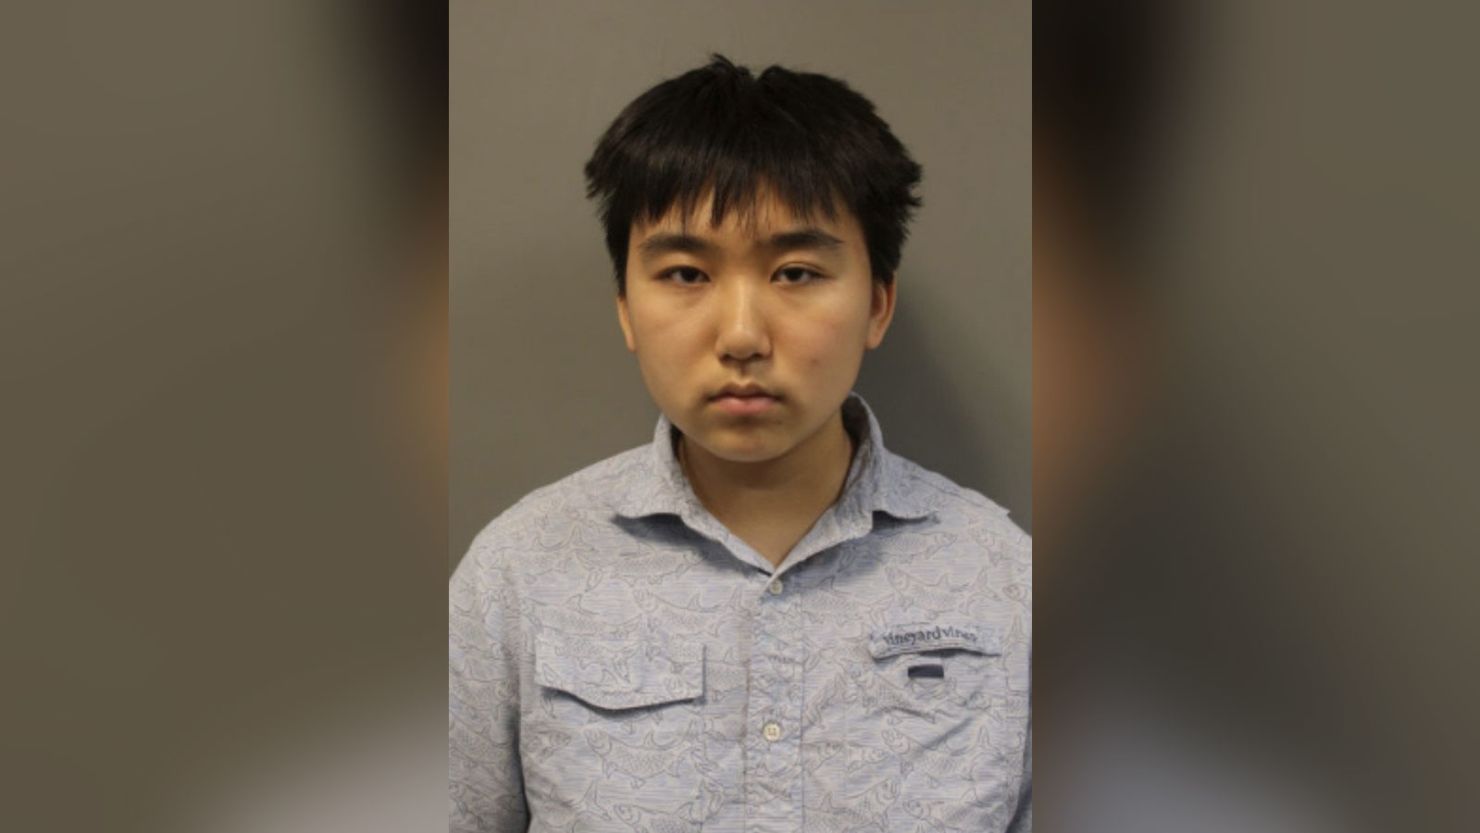 Alex Ye, an 18-year-old Maryland high school student, was arrested on Wednesday and charged with threat of mass violence after police say they discovered evidence that the teen had plans to commit a school shooting.